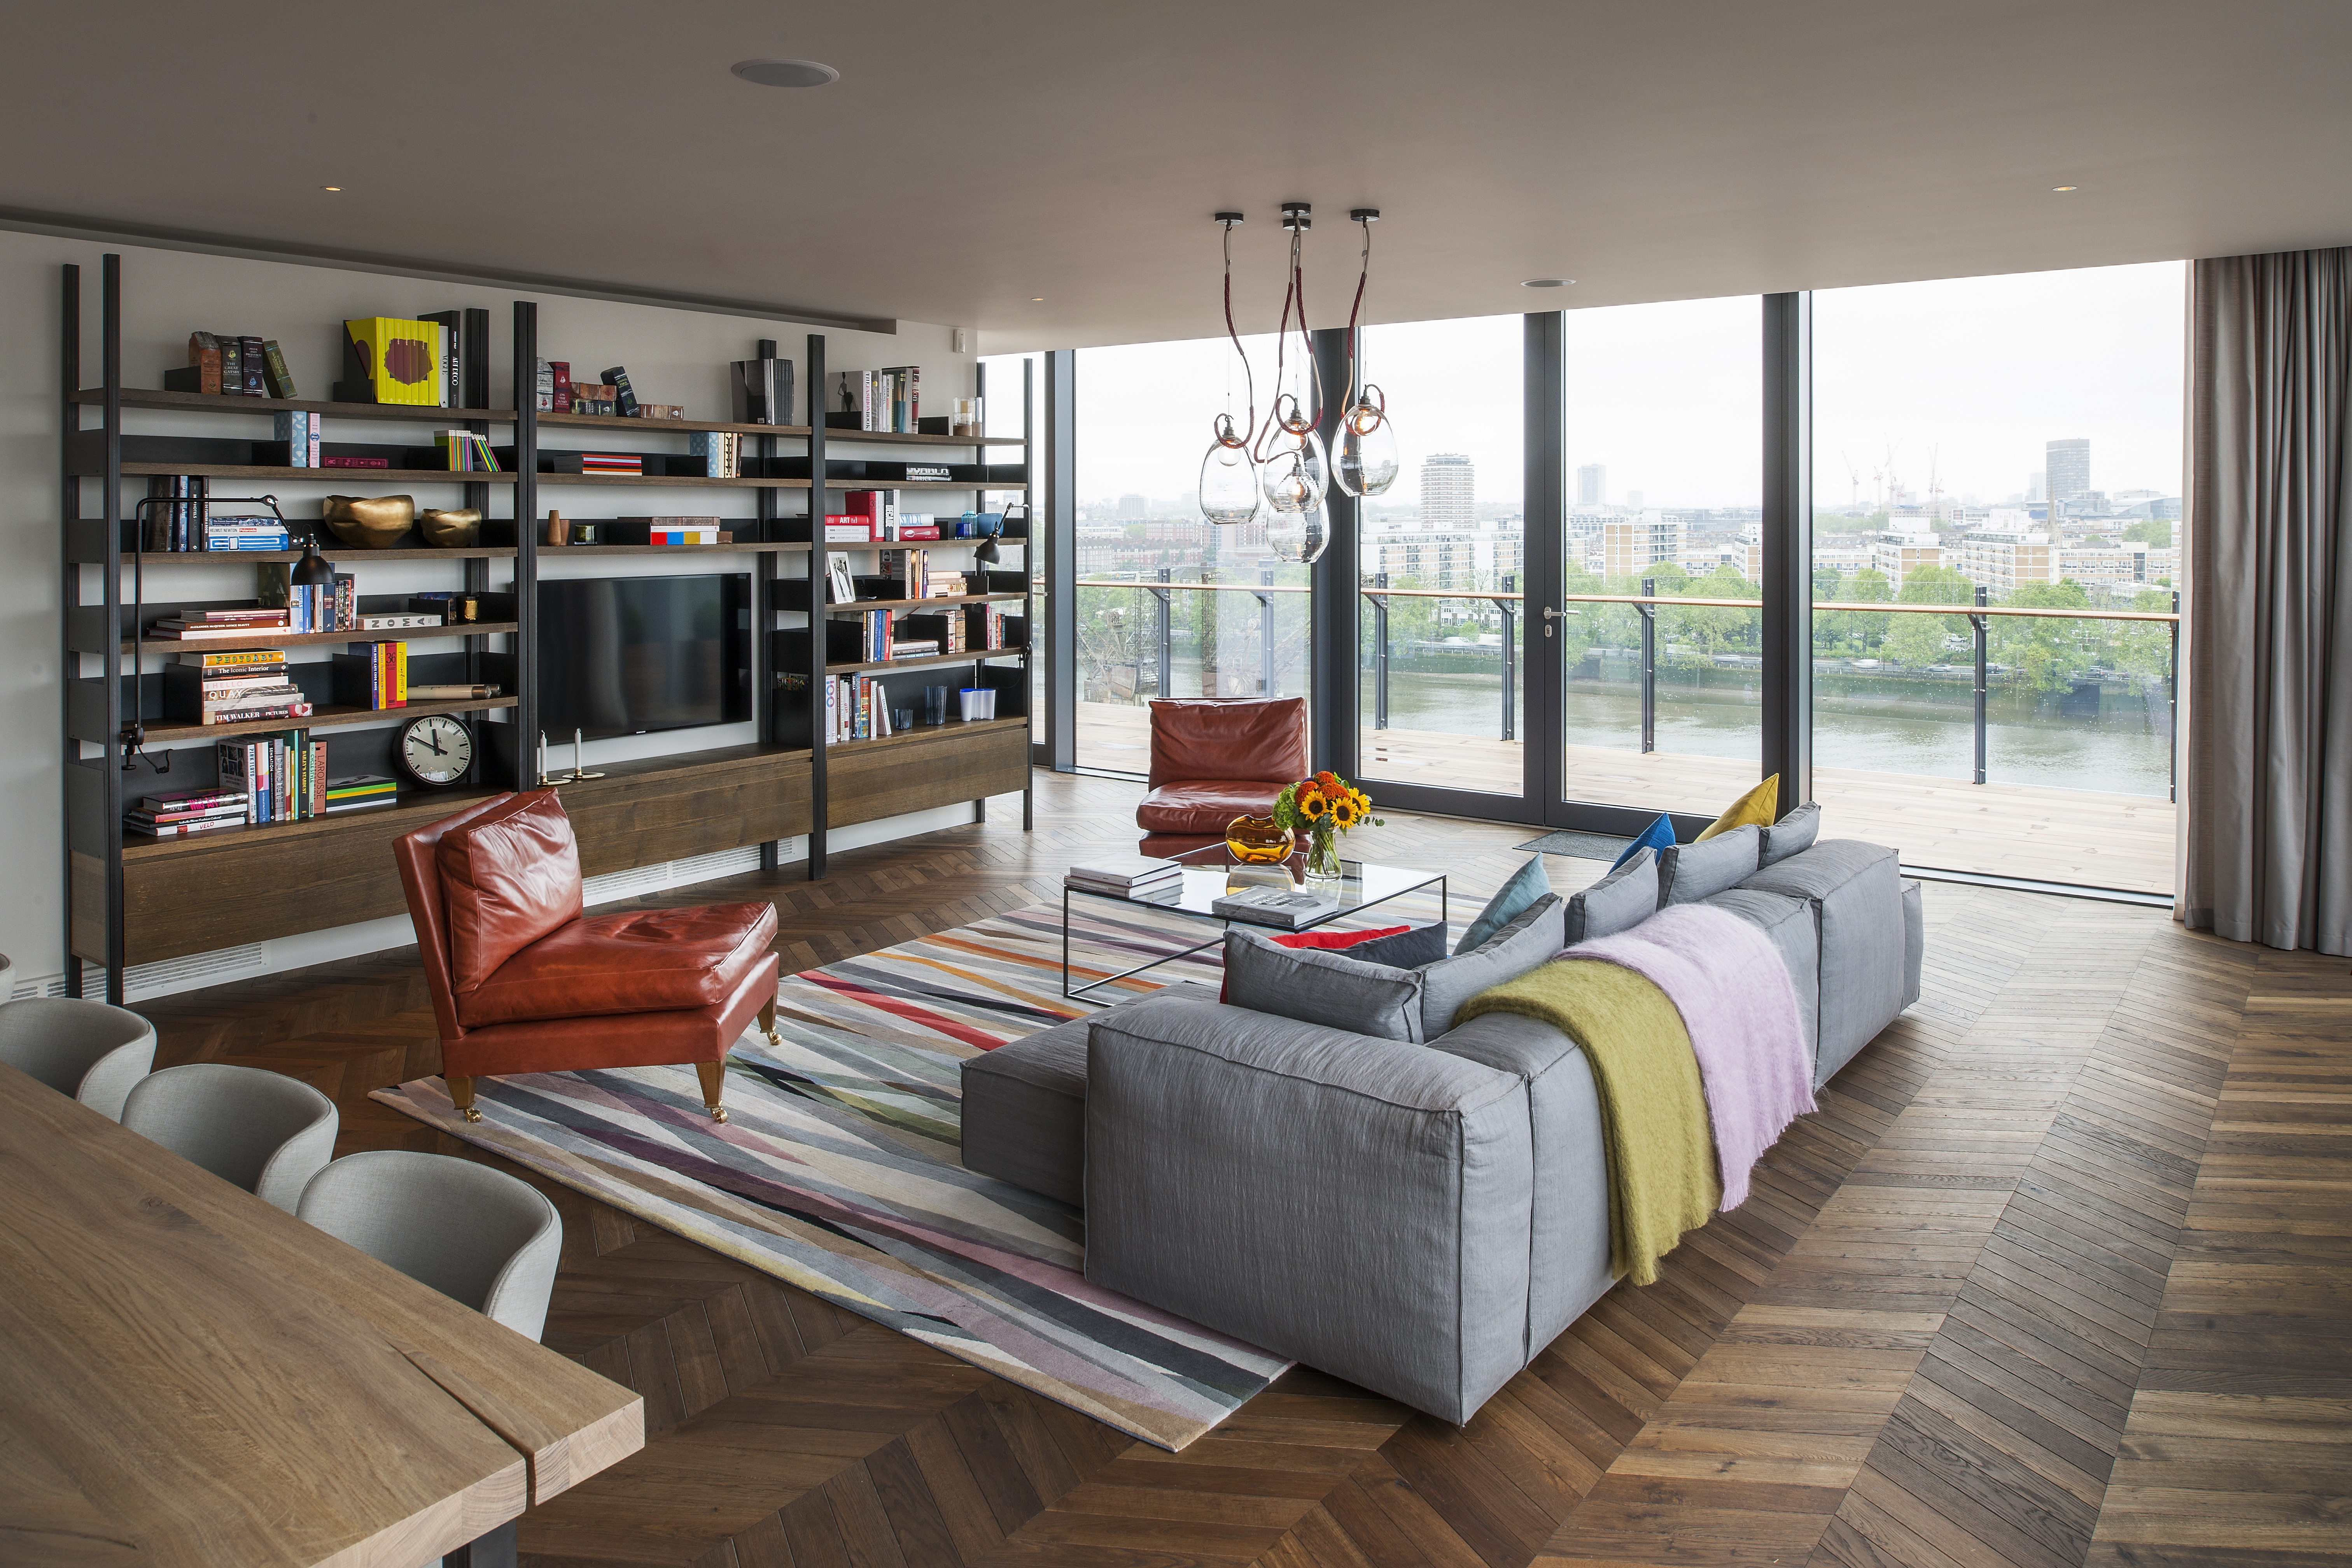 Apartment with view over the Thames river featuring a chevron timber floor.